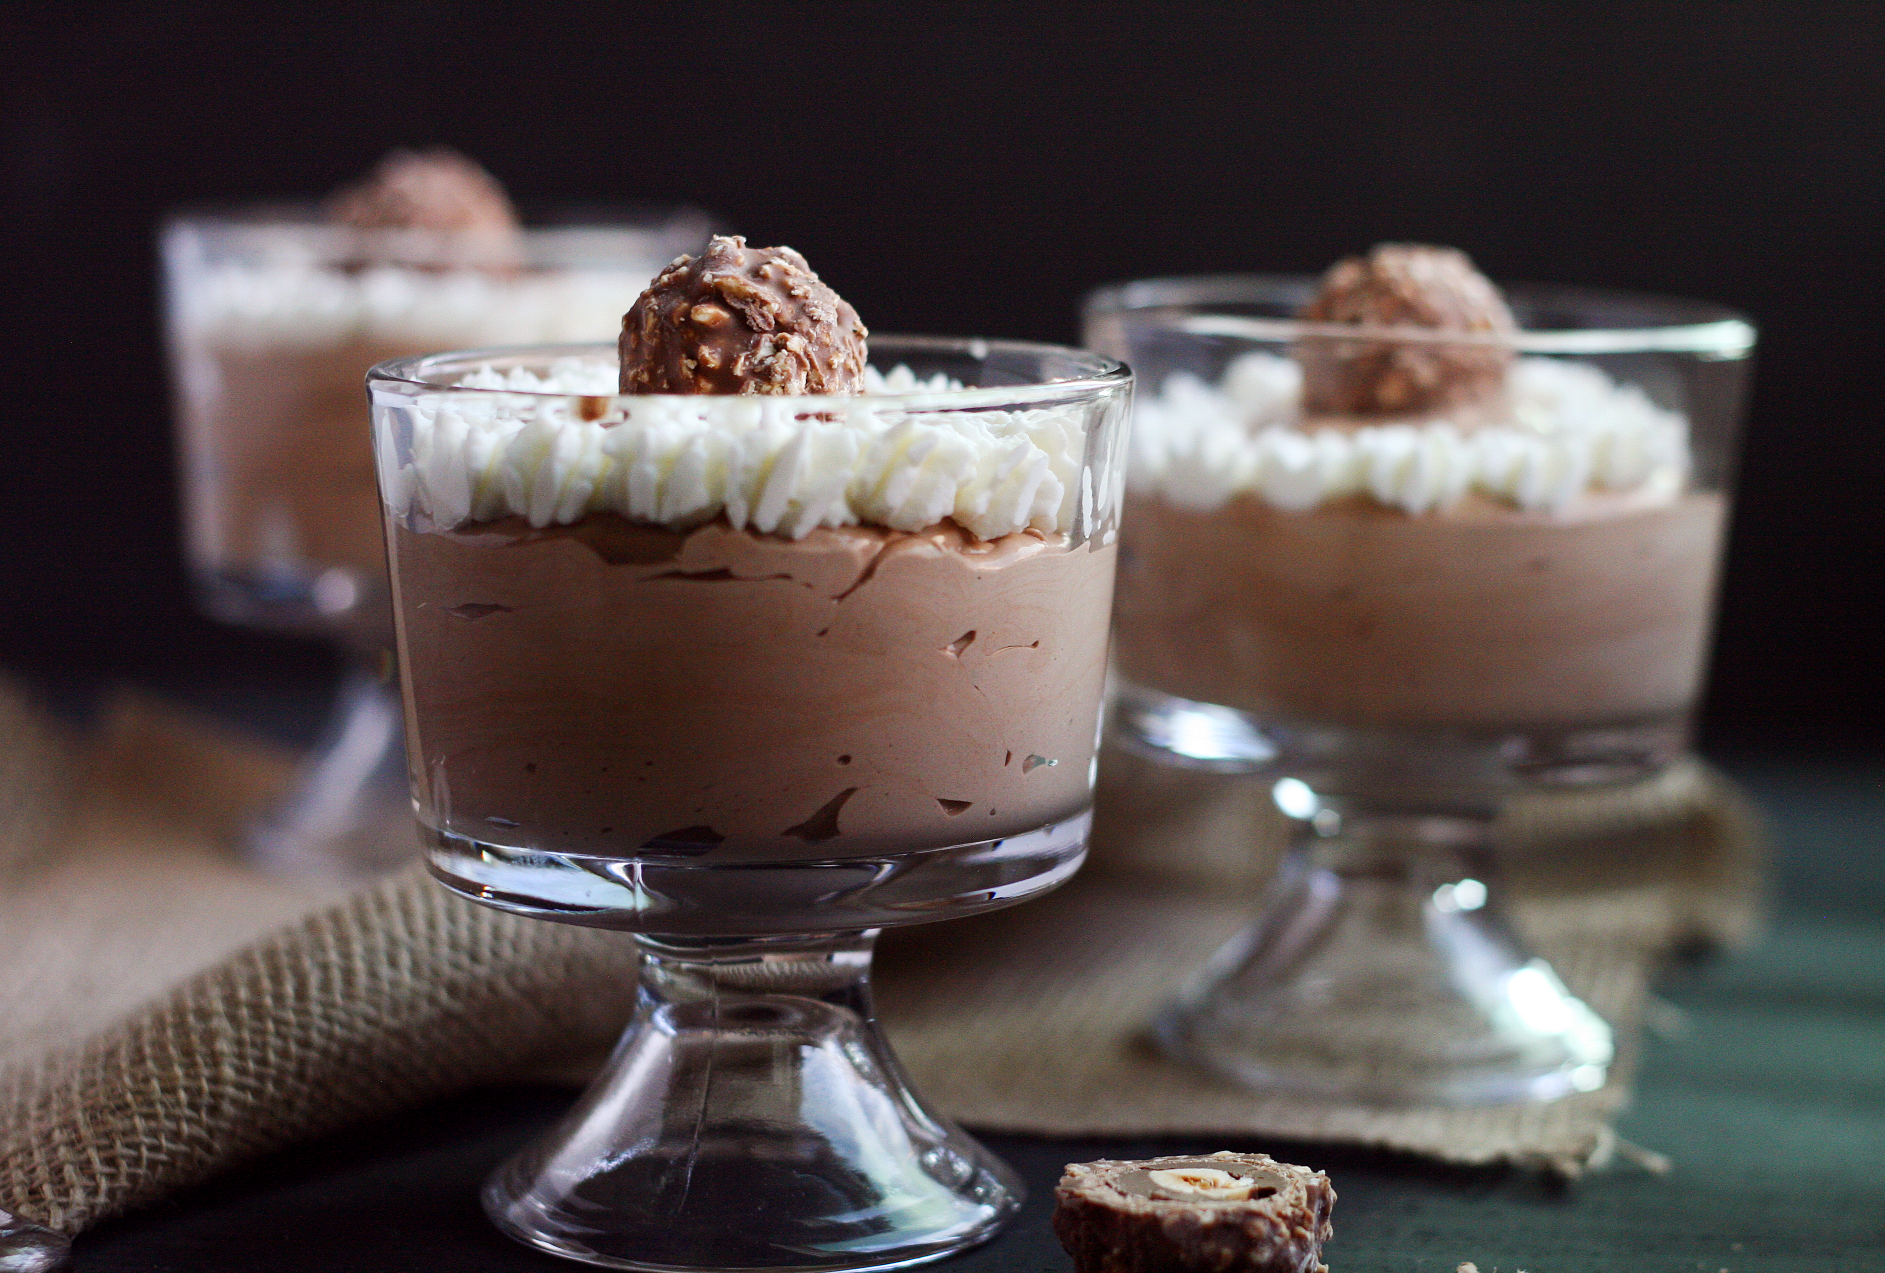 Best Chocolate Mousse Recipe - Dessert For Two